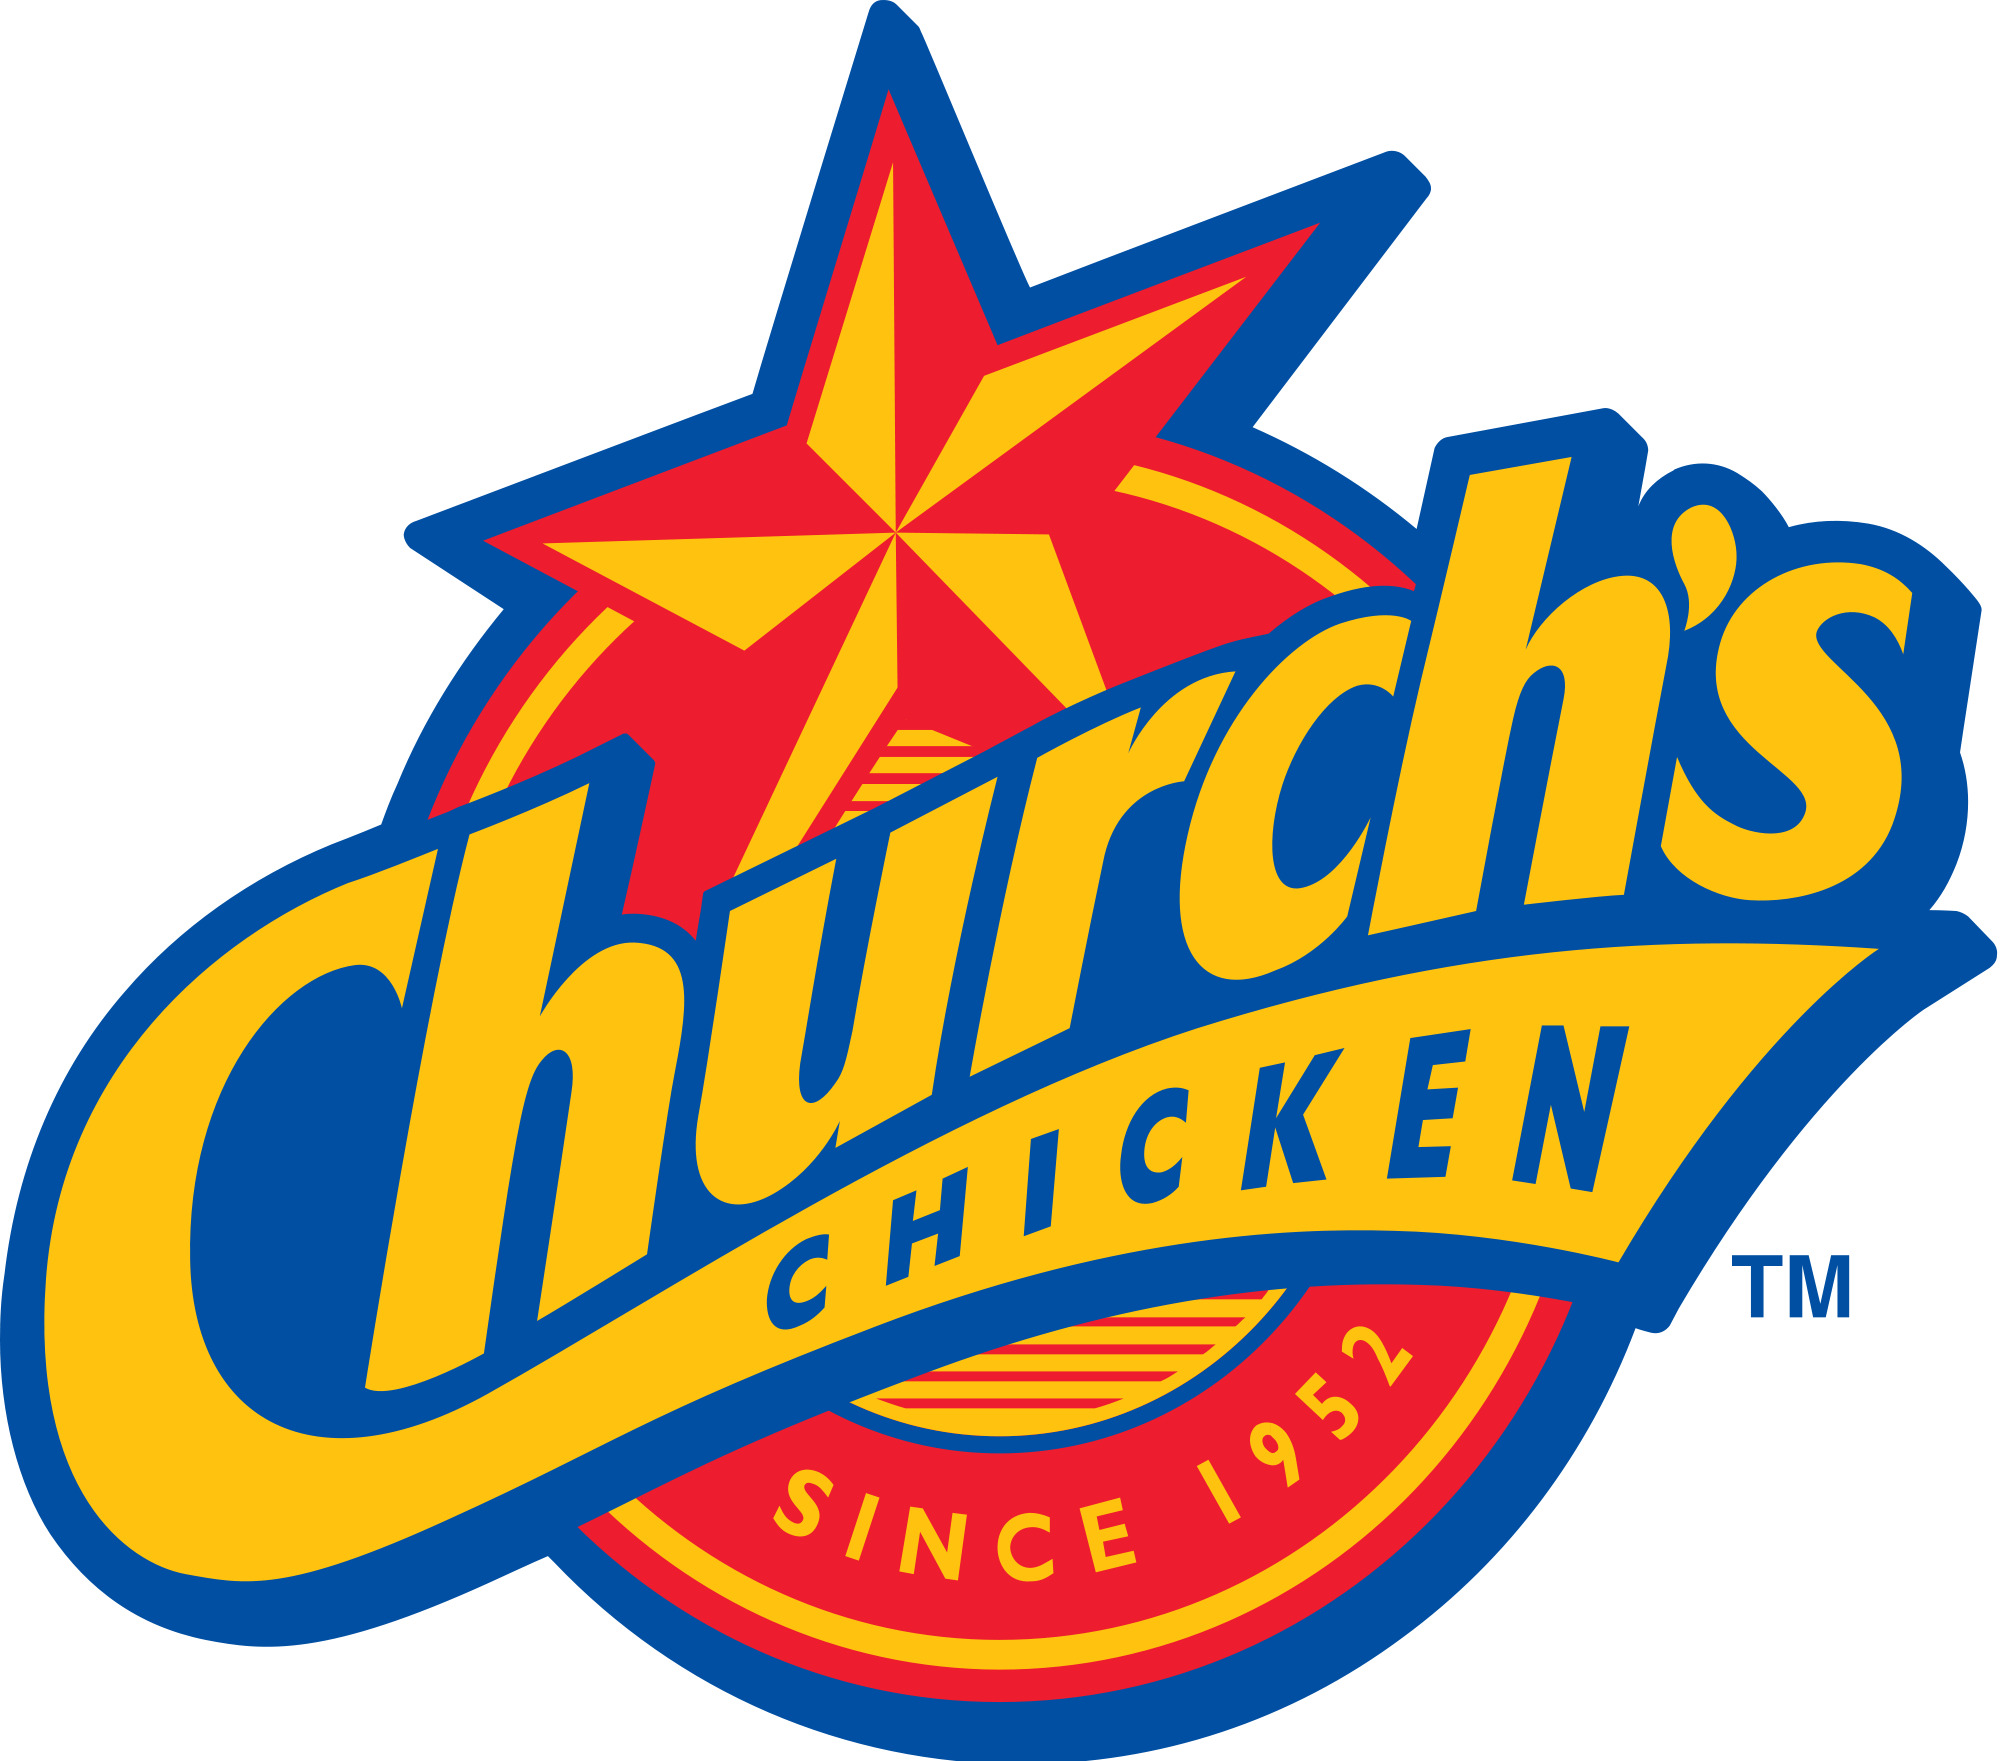     From  Http   Logos Wikia Com Wiki Church S Chicken Oldid 628562